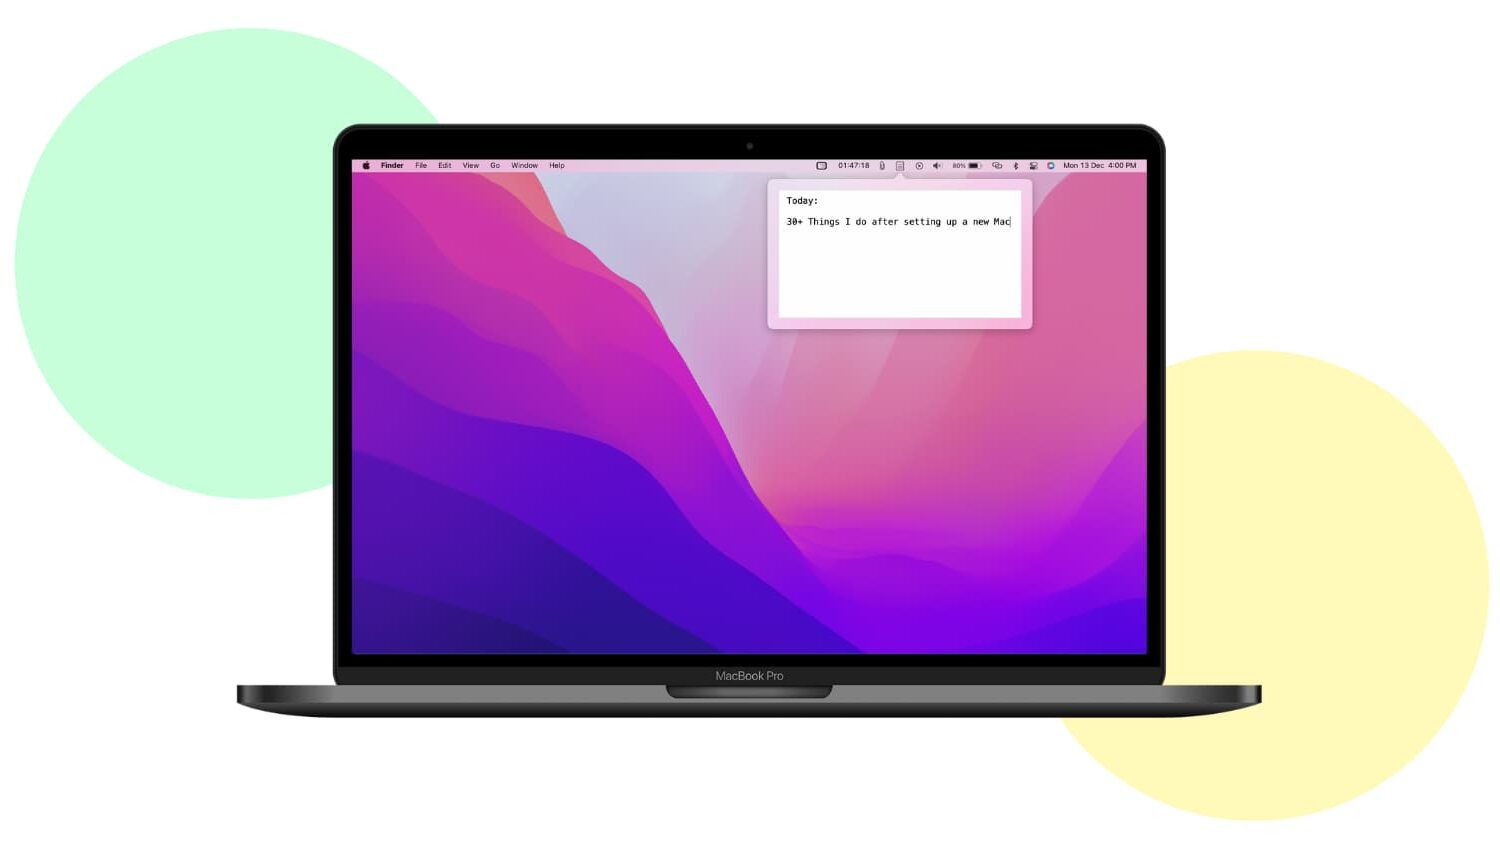 MacBook Pro with macOS Monterey wallpaper on a light background